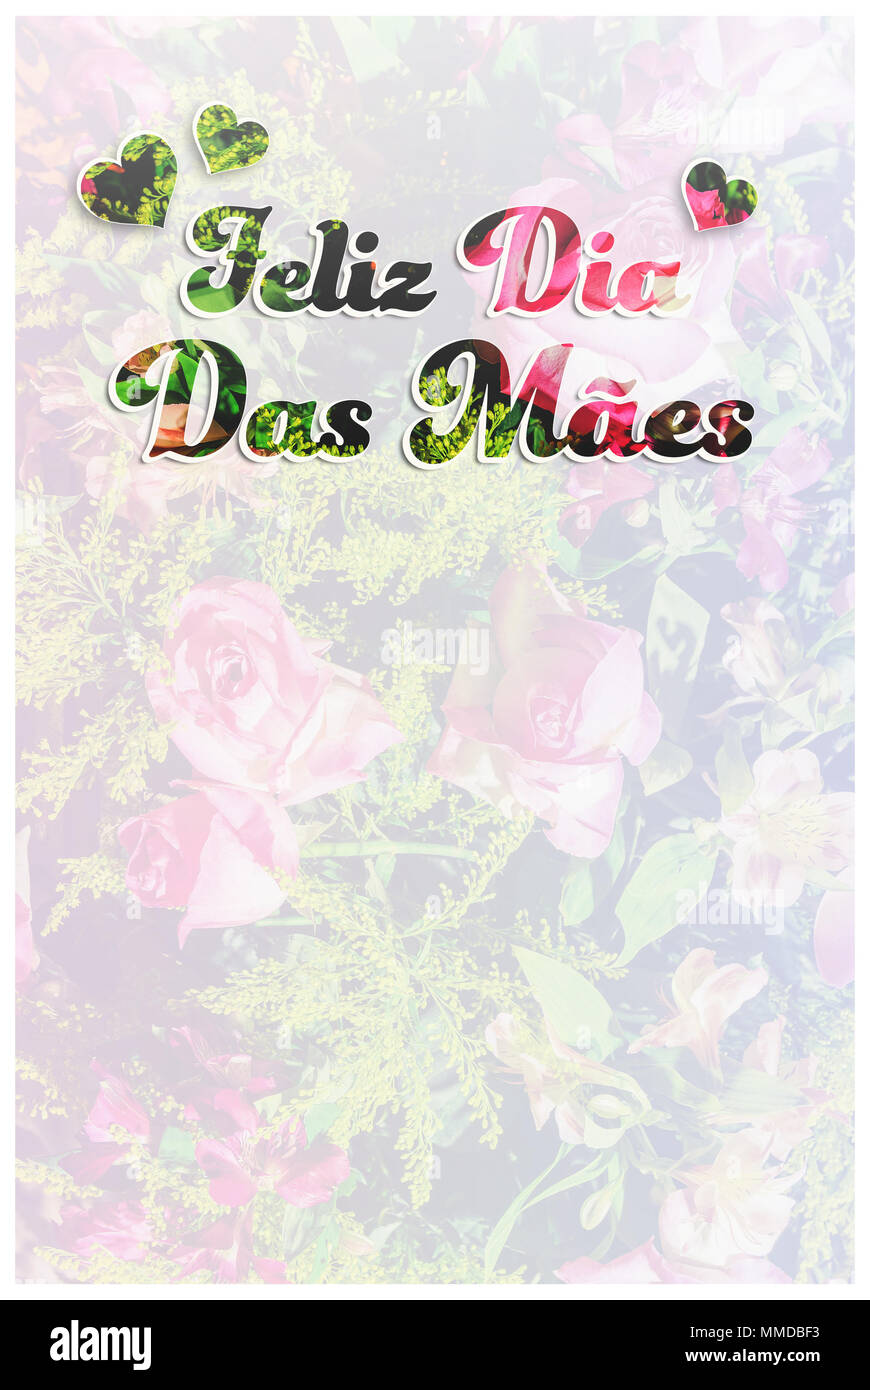 https://c8.alamy.com/comp/MMDBF3/card-with-feliz-dia-das-maes-portuguese-message-written-on-a-light-background-made-of-a-photo-of-flowers-and-vivid-flowers-texture-some-hearts-arou-MMDBF3.jpg